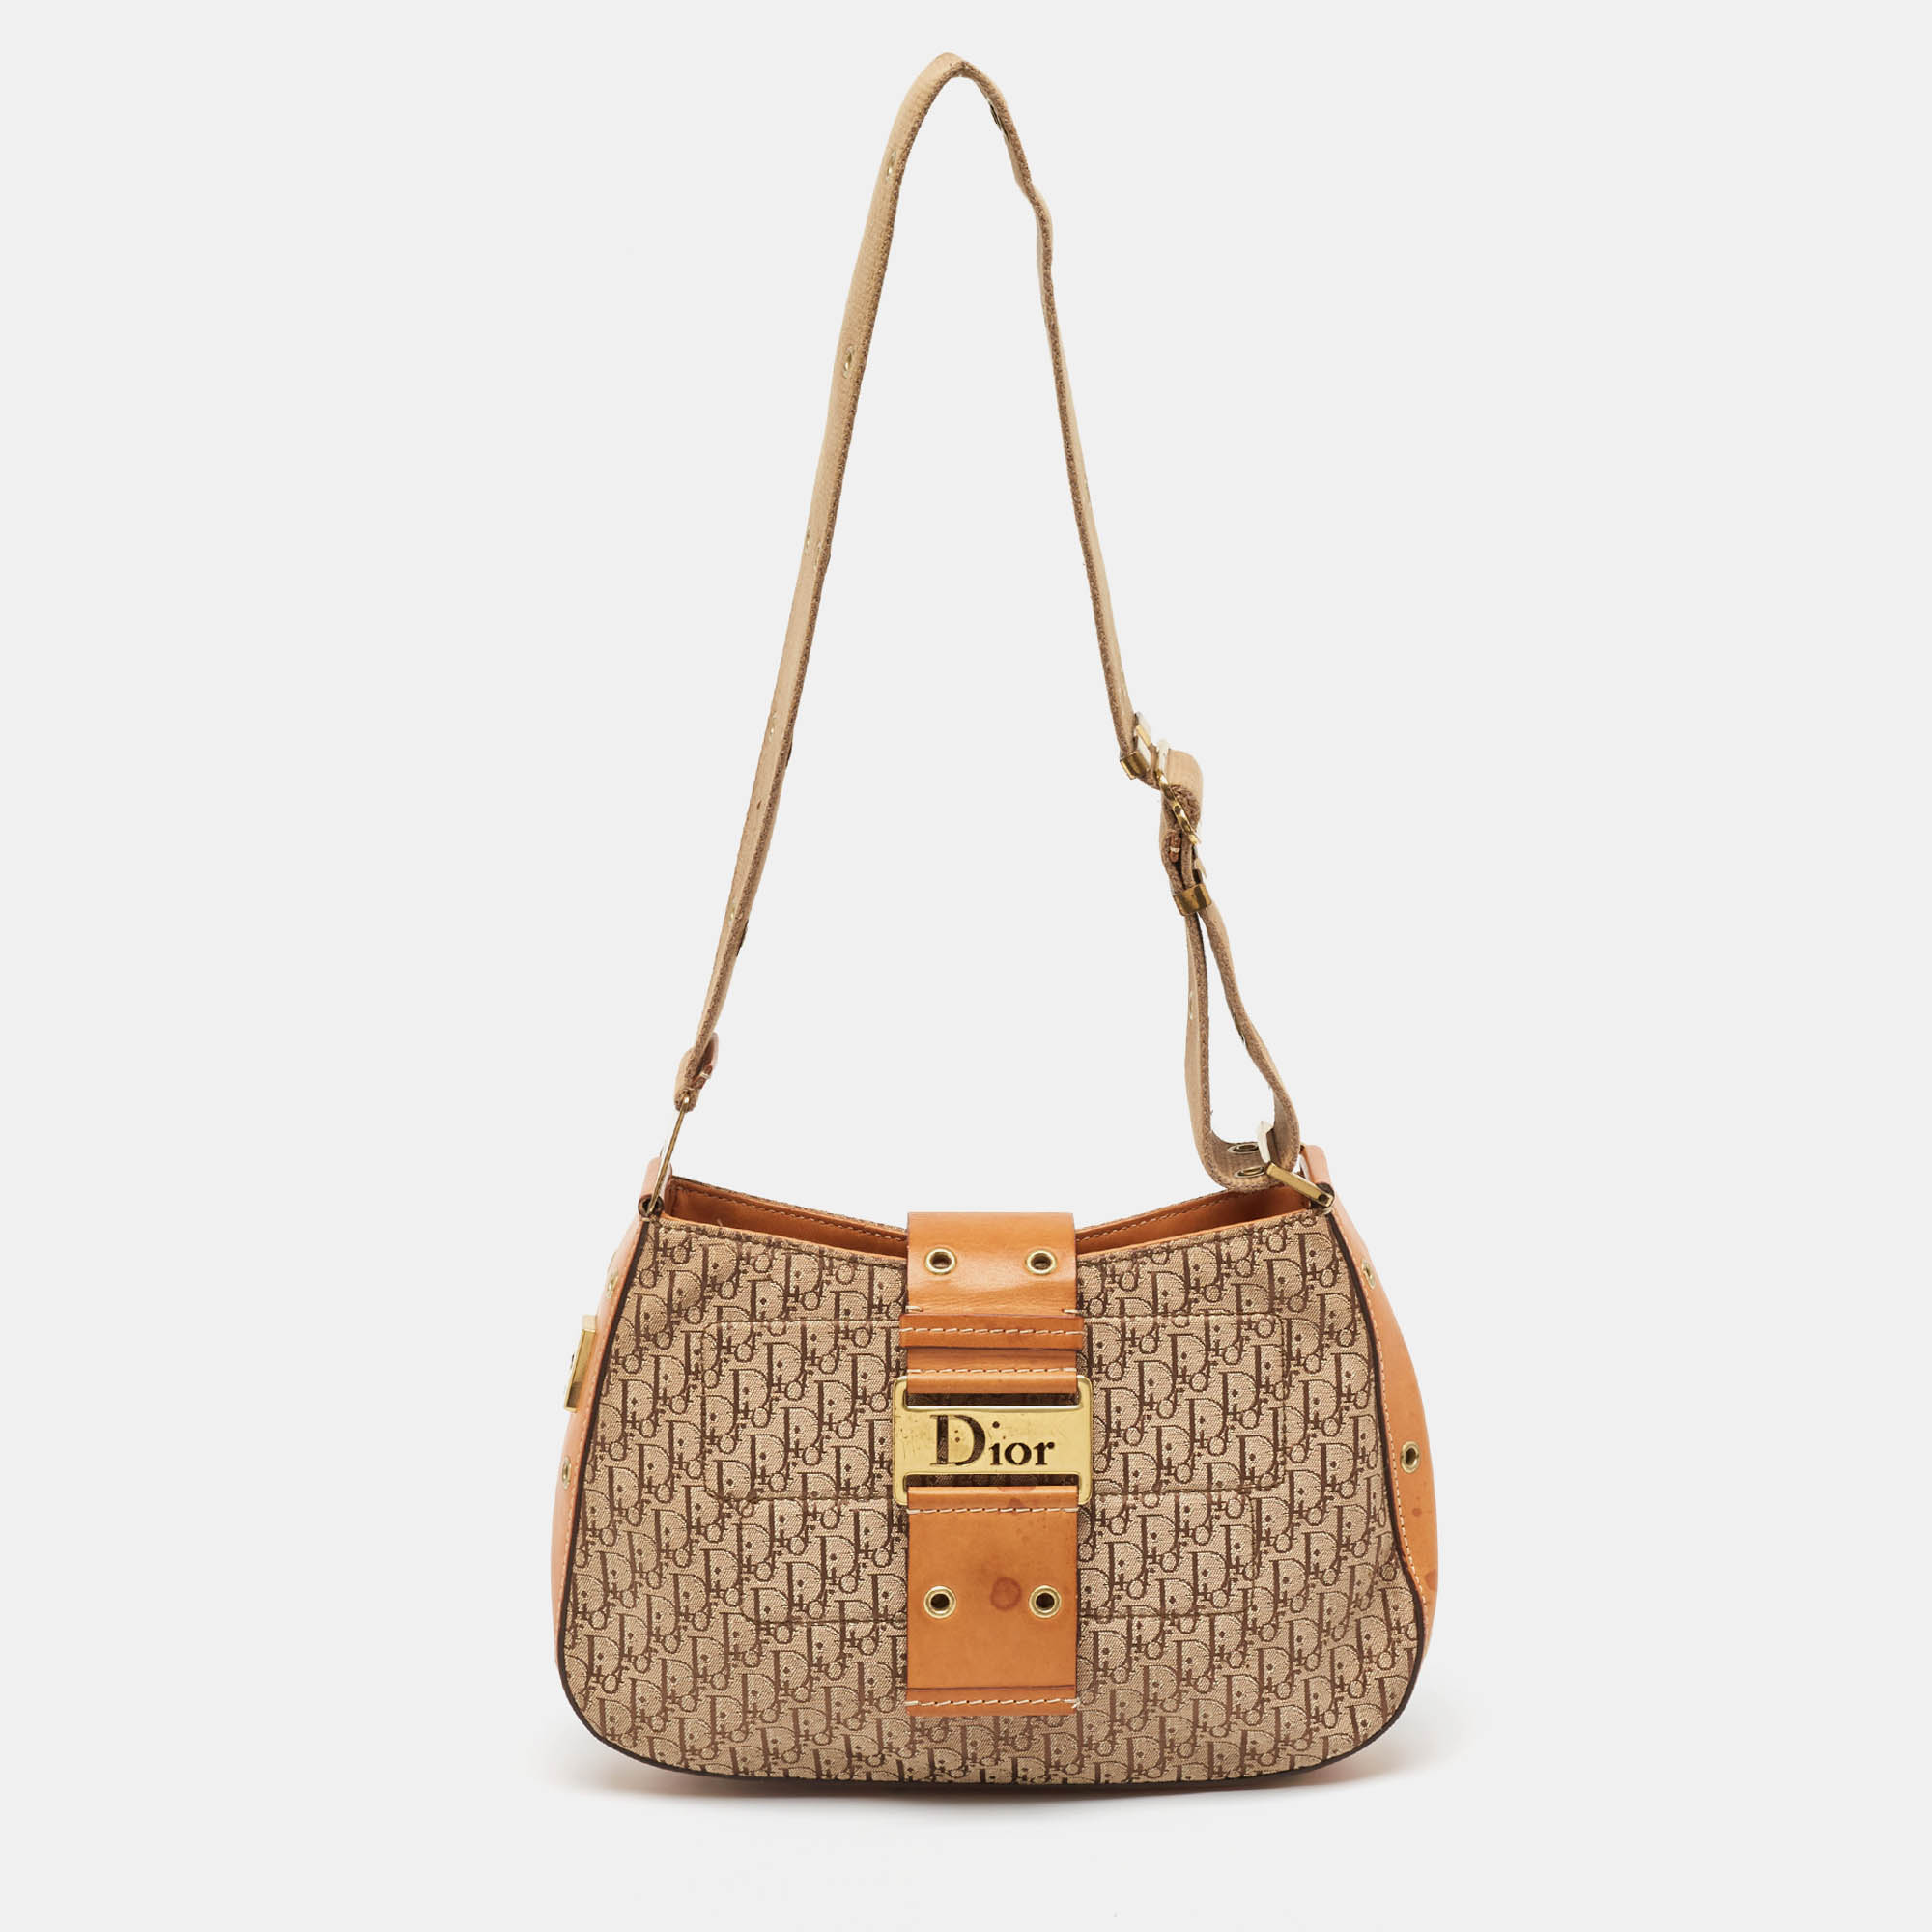 Designer bags are ideal companions for ample occasions Here we have a fashion meets functionality piece crafted with precision. It has been equipped with a well sized interior that can easily fit all your essentials.